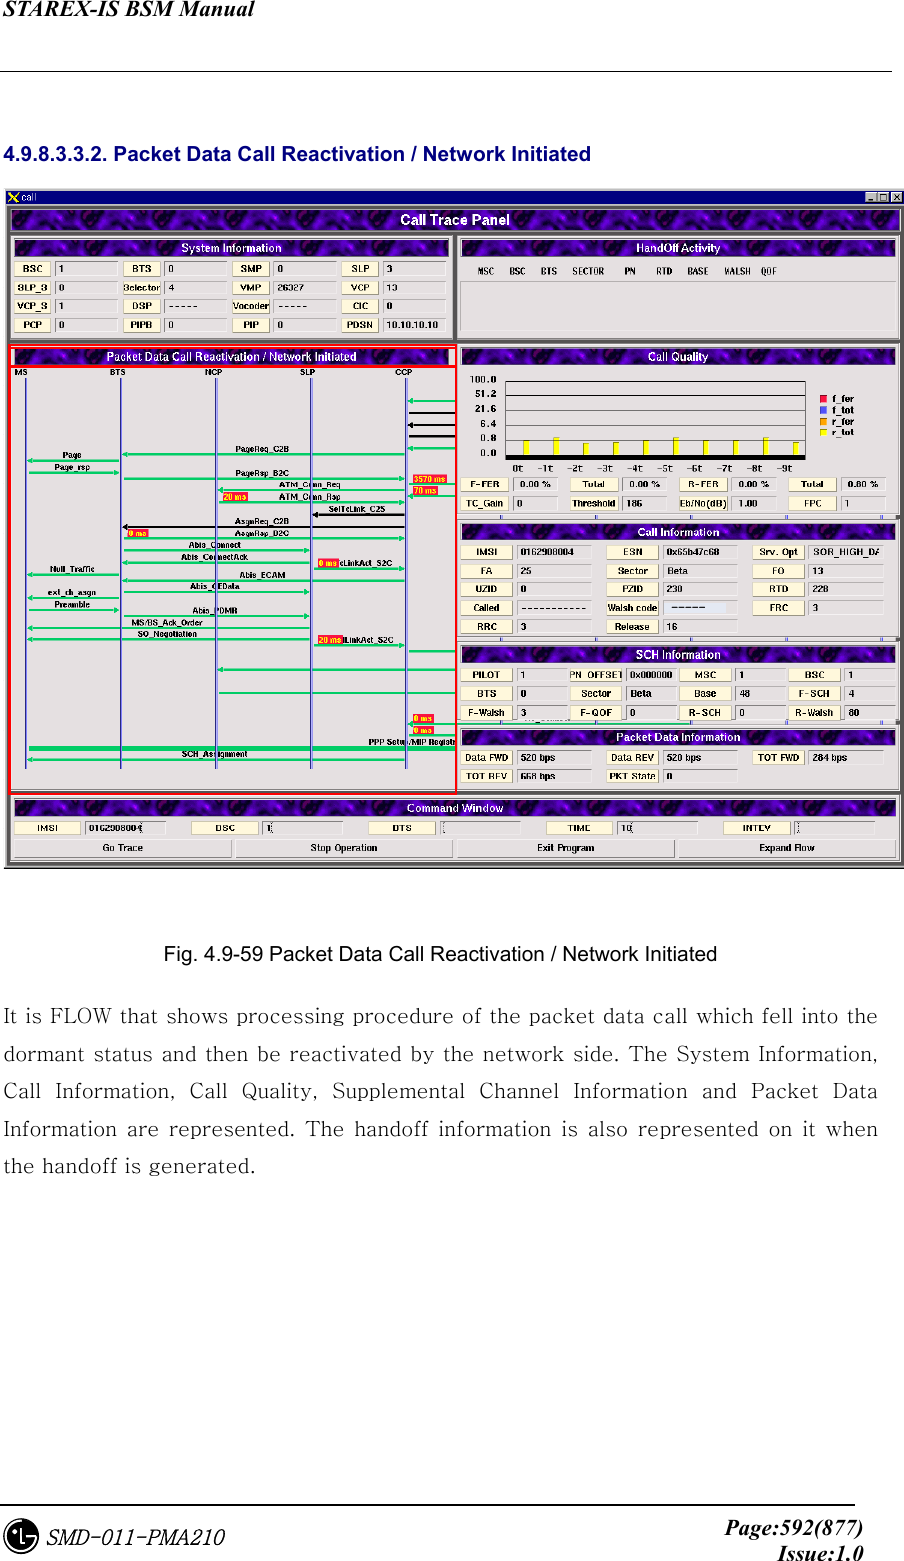 STAREX-IS BSM Manual     Page:592(877)Issue:1.0SMD-011-PMA210  4.9.8.3.3.2. Packet Data Call Reactivation / Network Initiated ----- Fig. 4.9-59 Packet Data Call Reactivation / Network Initiated It is FLOW that shows processing procedure of the packet data call which fell into the dormant status and then be reactivated by the network side. The System Information, Call  Information,  Call  Quality,  Supplemental  Channel  Information  and  Packet  Data Information  are  represented.  The  handoff  information  is  also  represented  on  it  when the handoff is generated. 